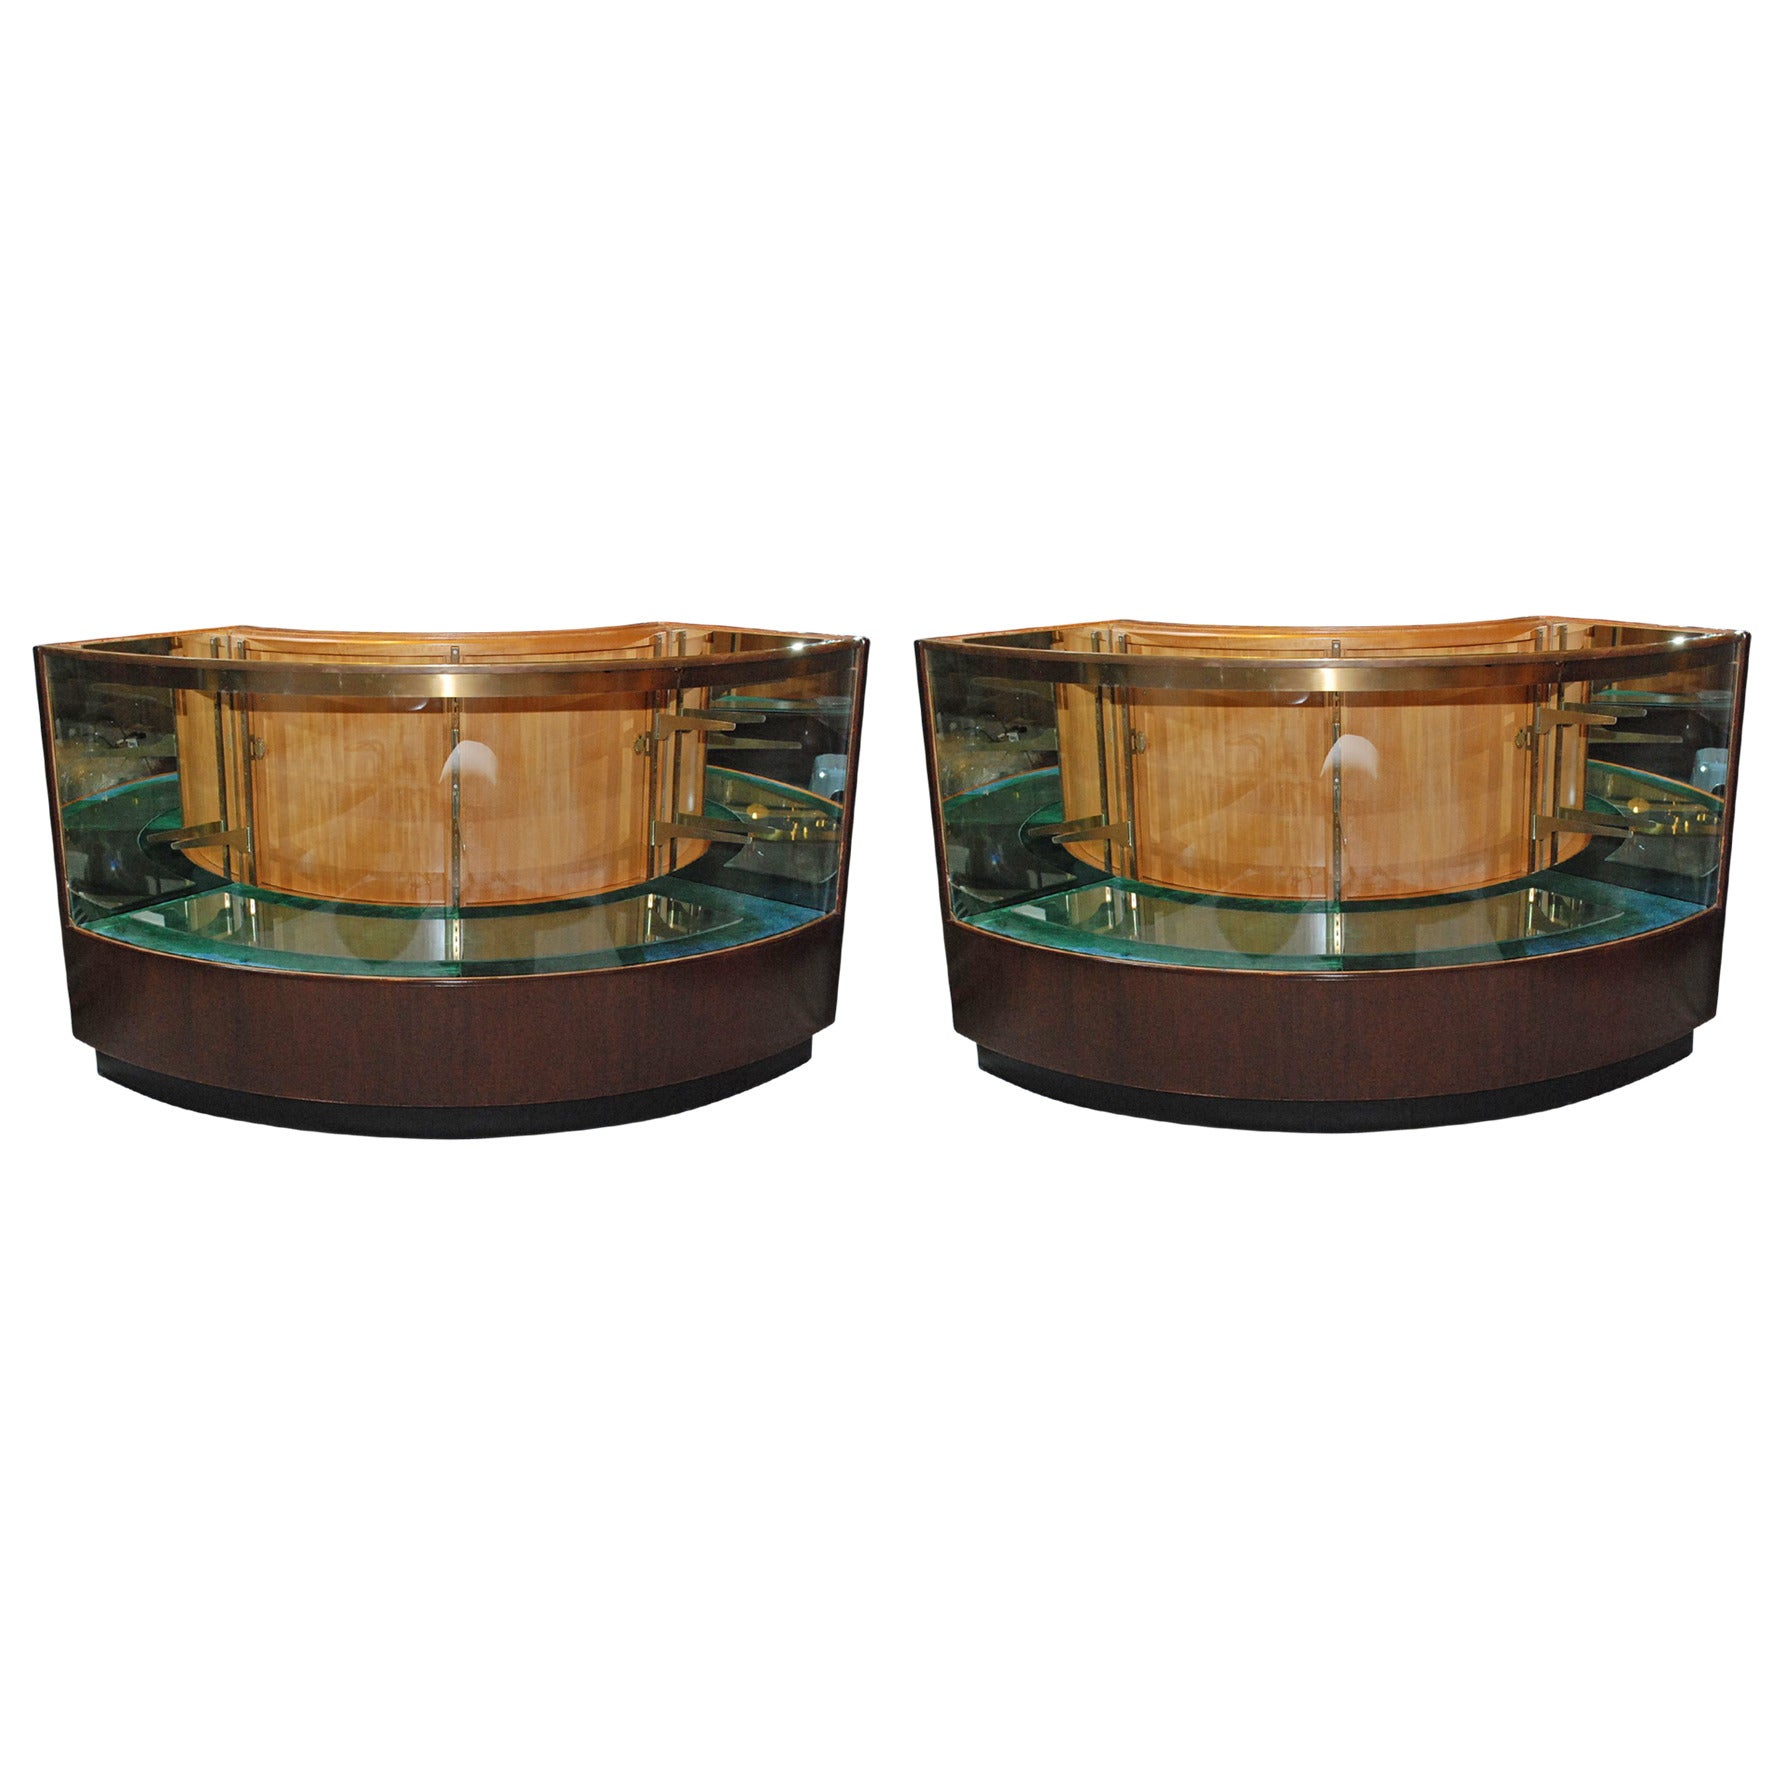 Set of Two Display Cabinets from Bullocks Wilshire